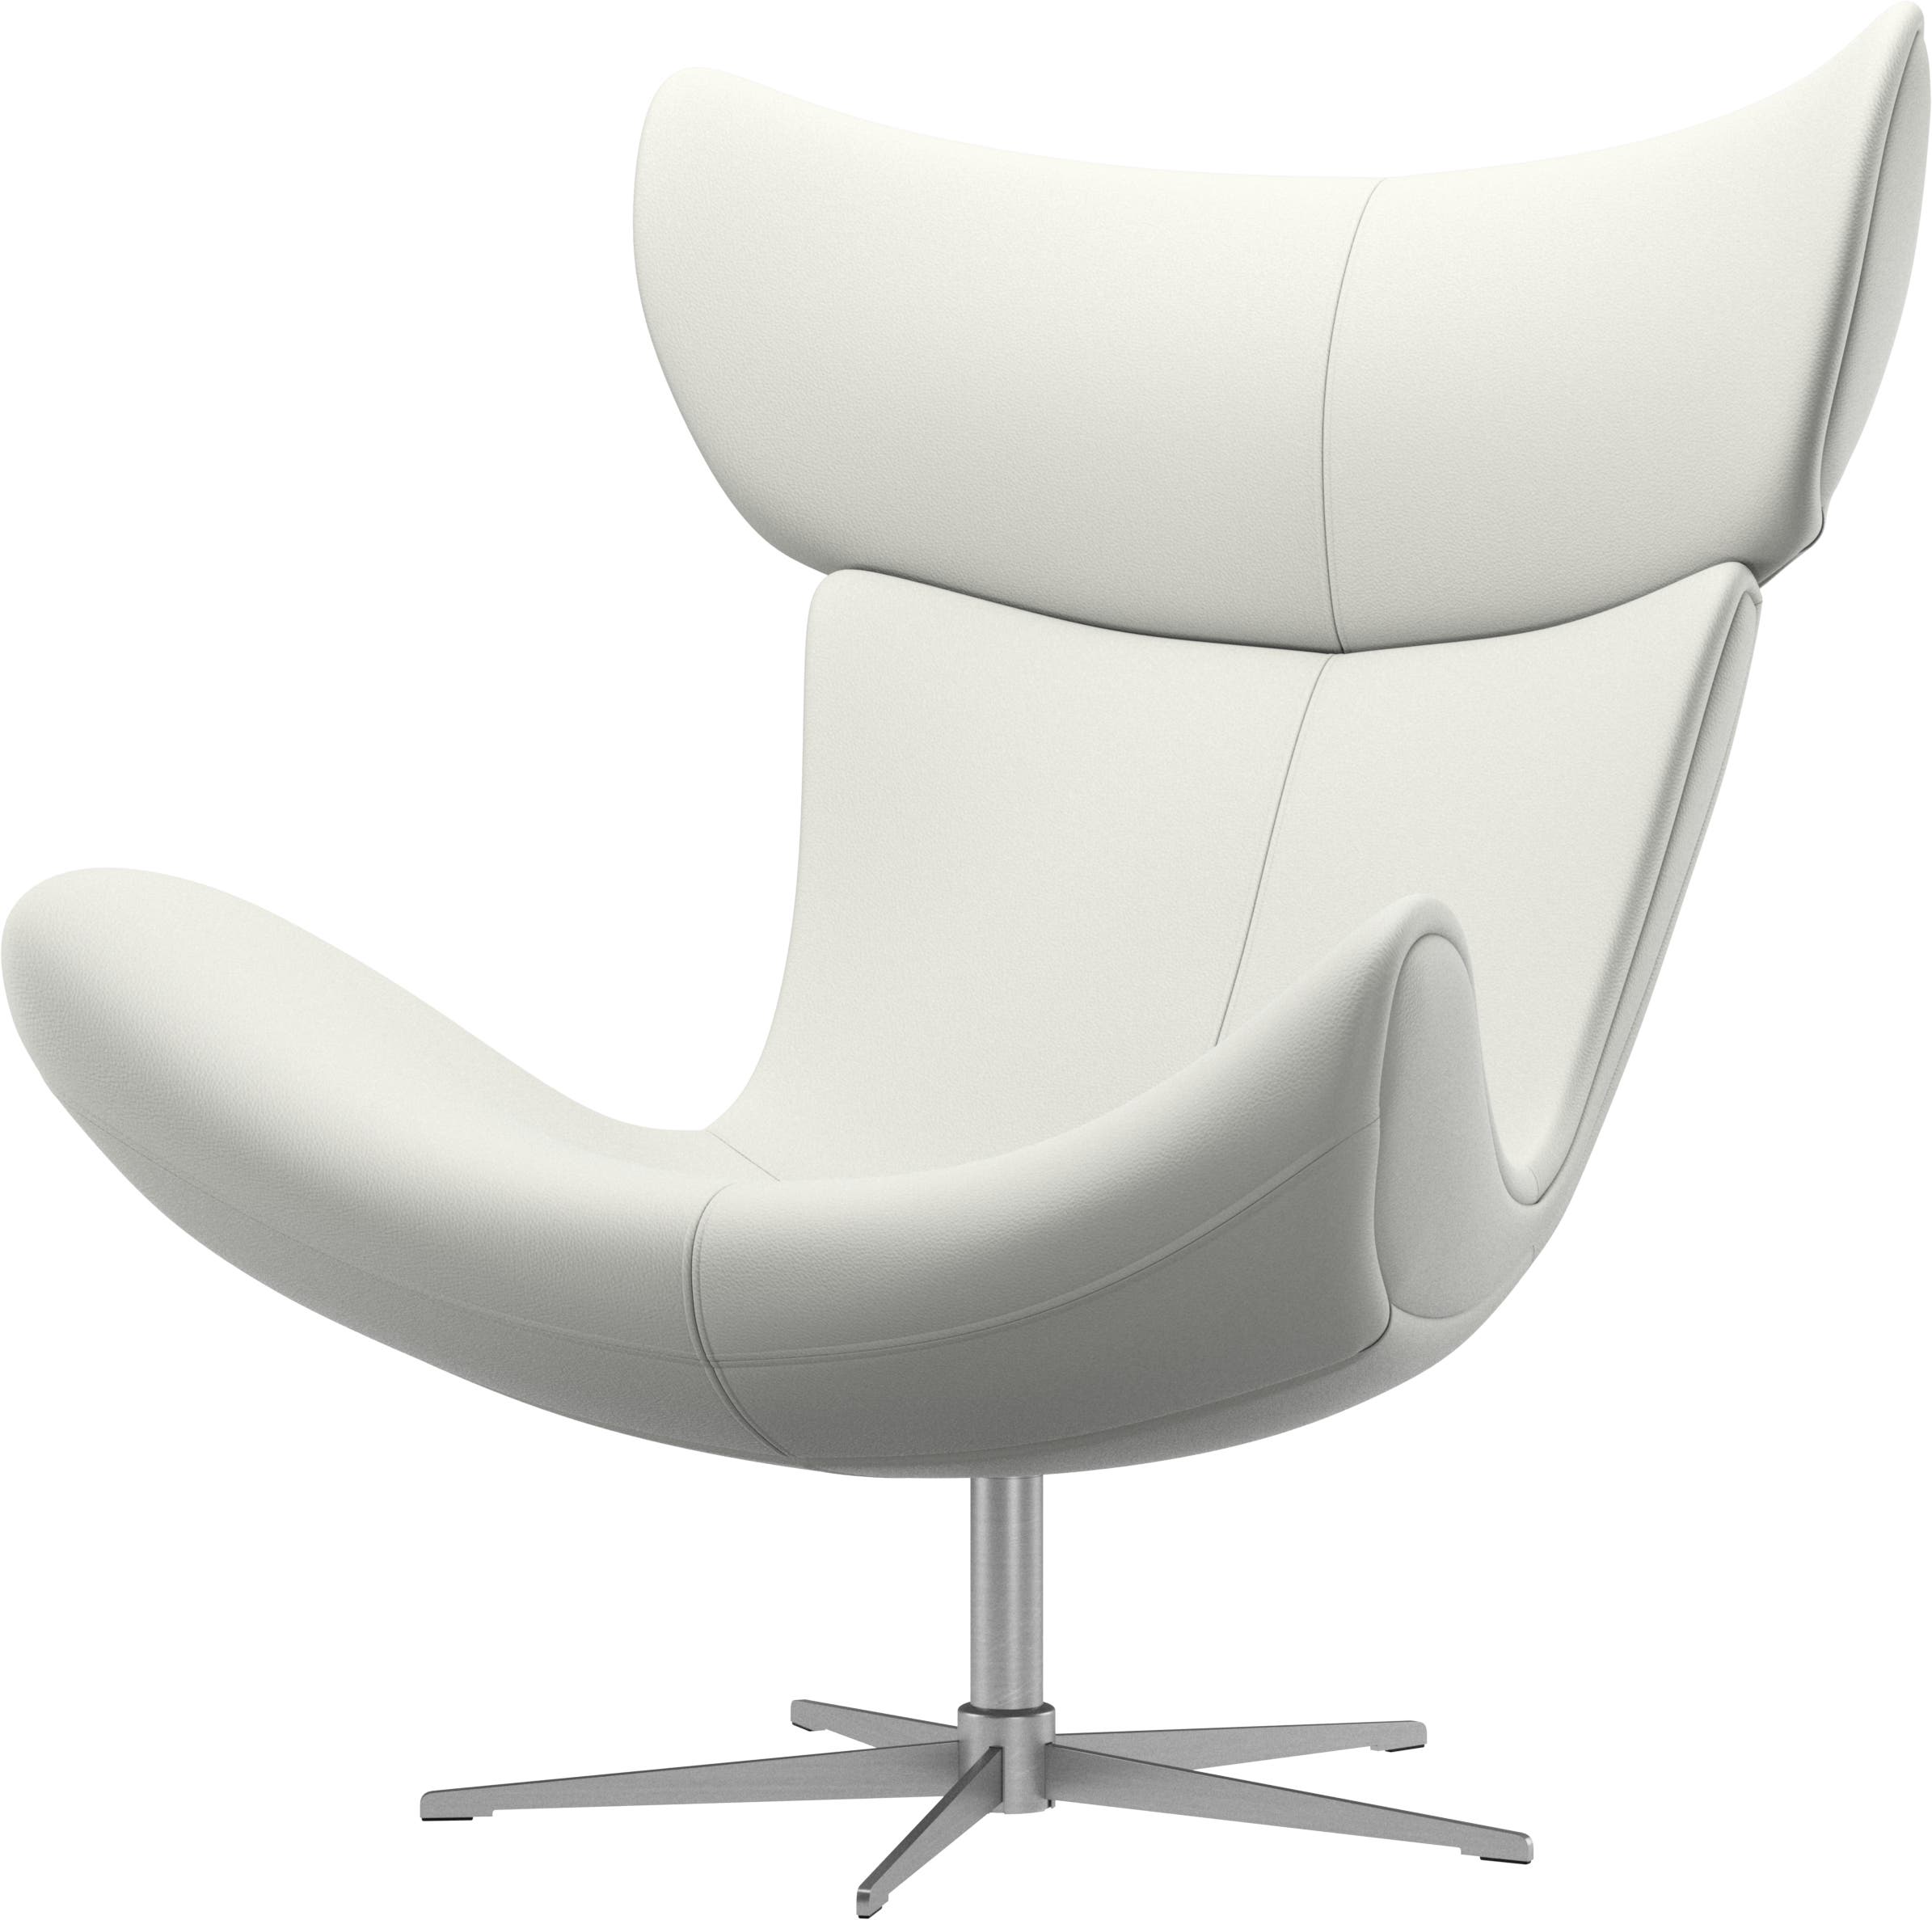 Imola chair with swivel function